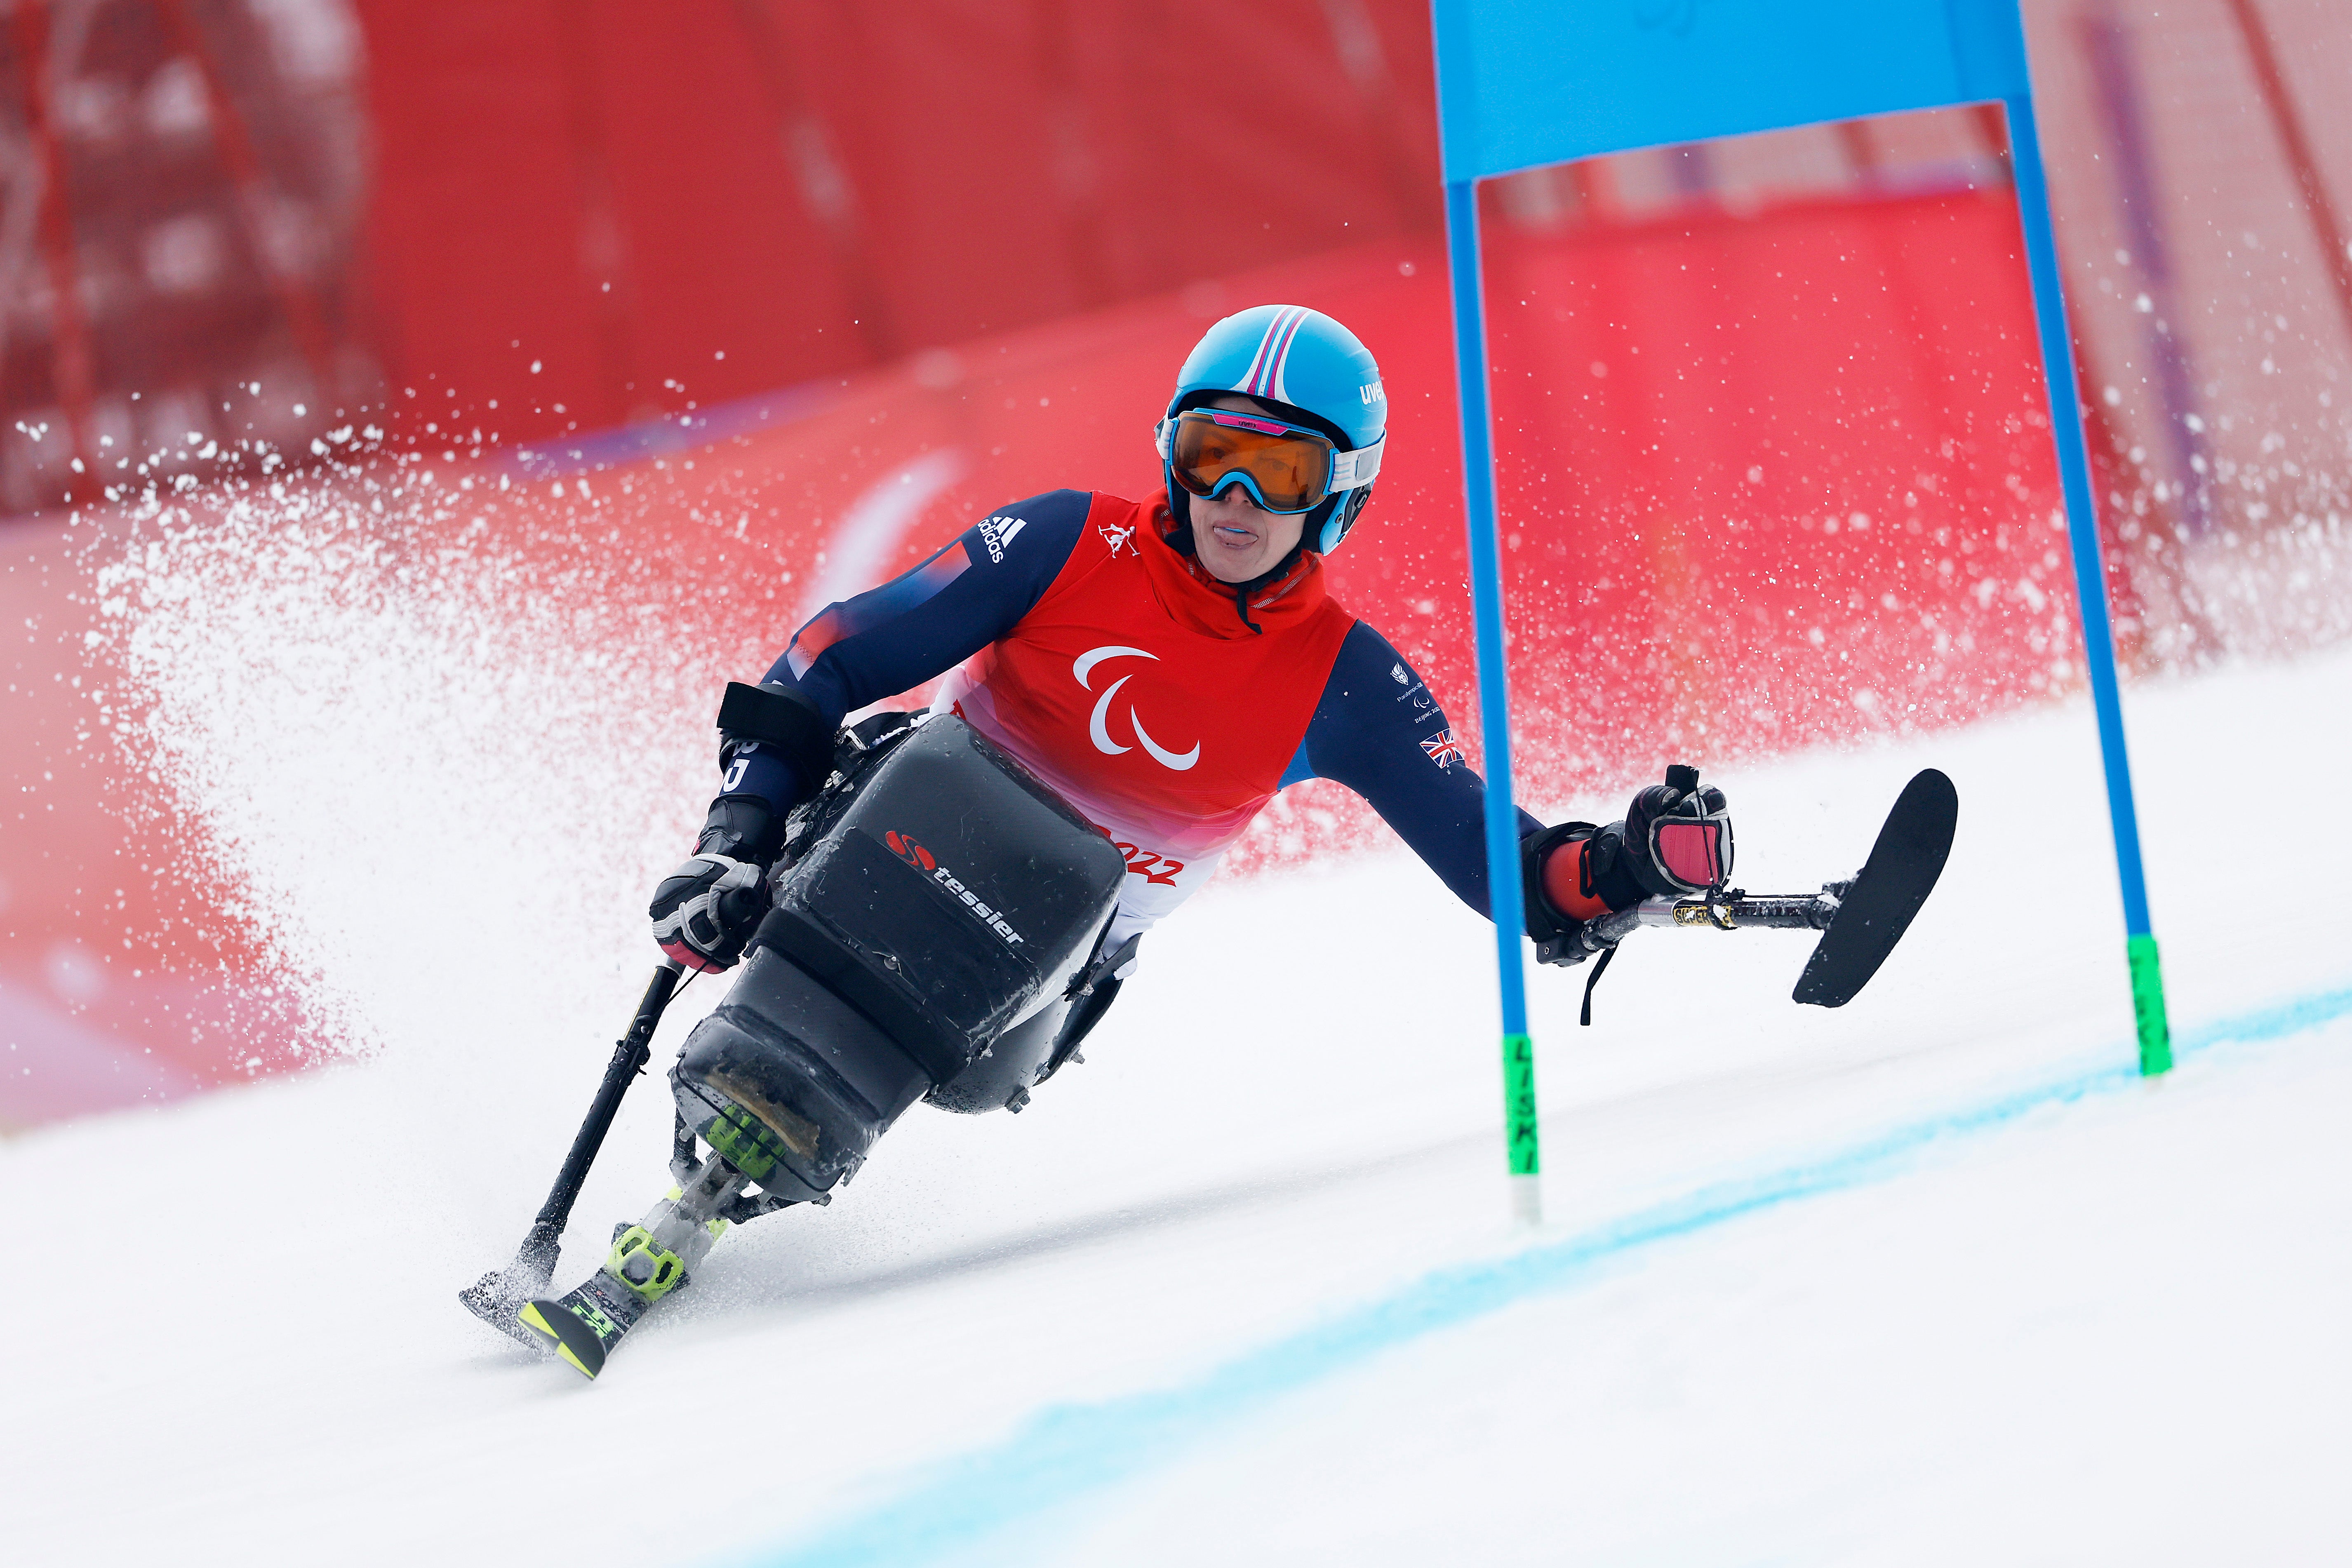 Shona Brownlee has recorded two top-ten finishes in sitting skiing in Beijing